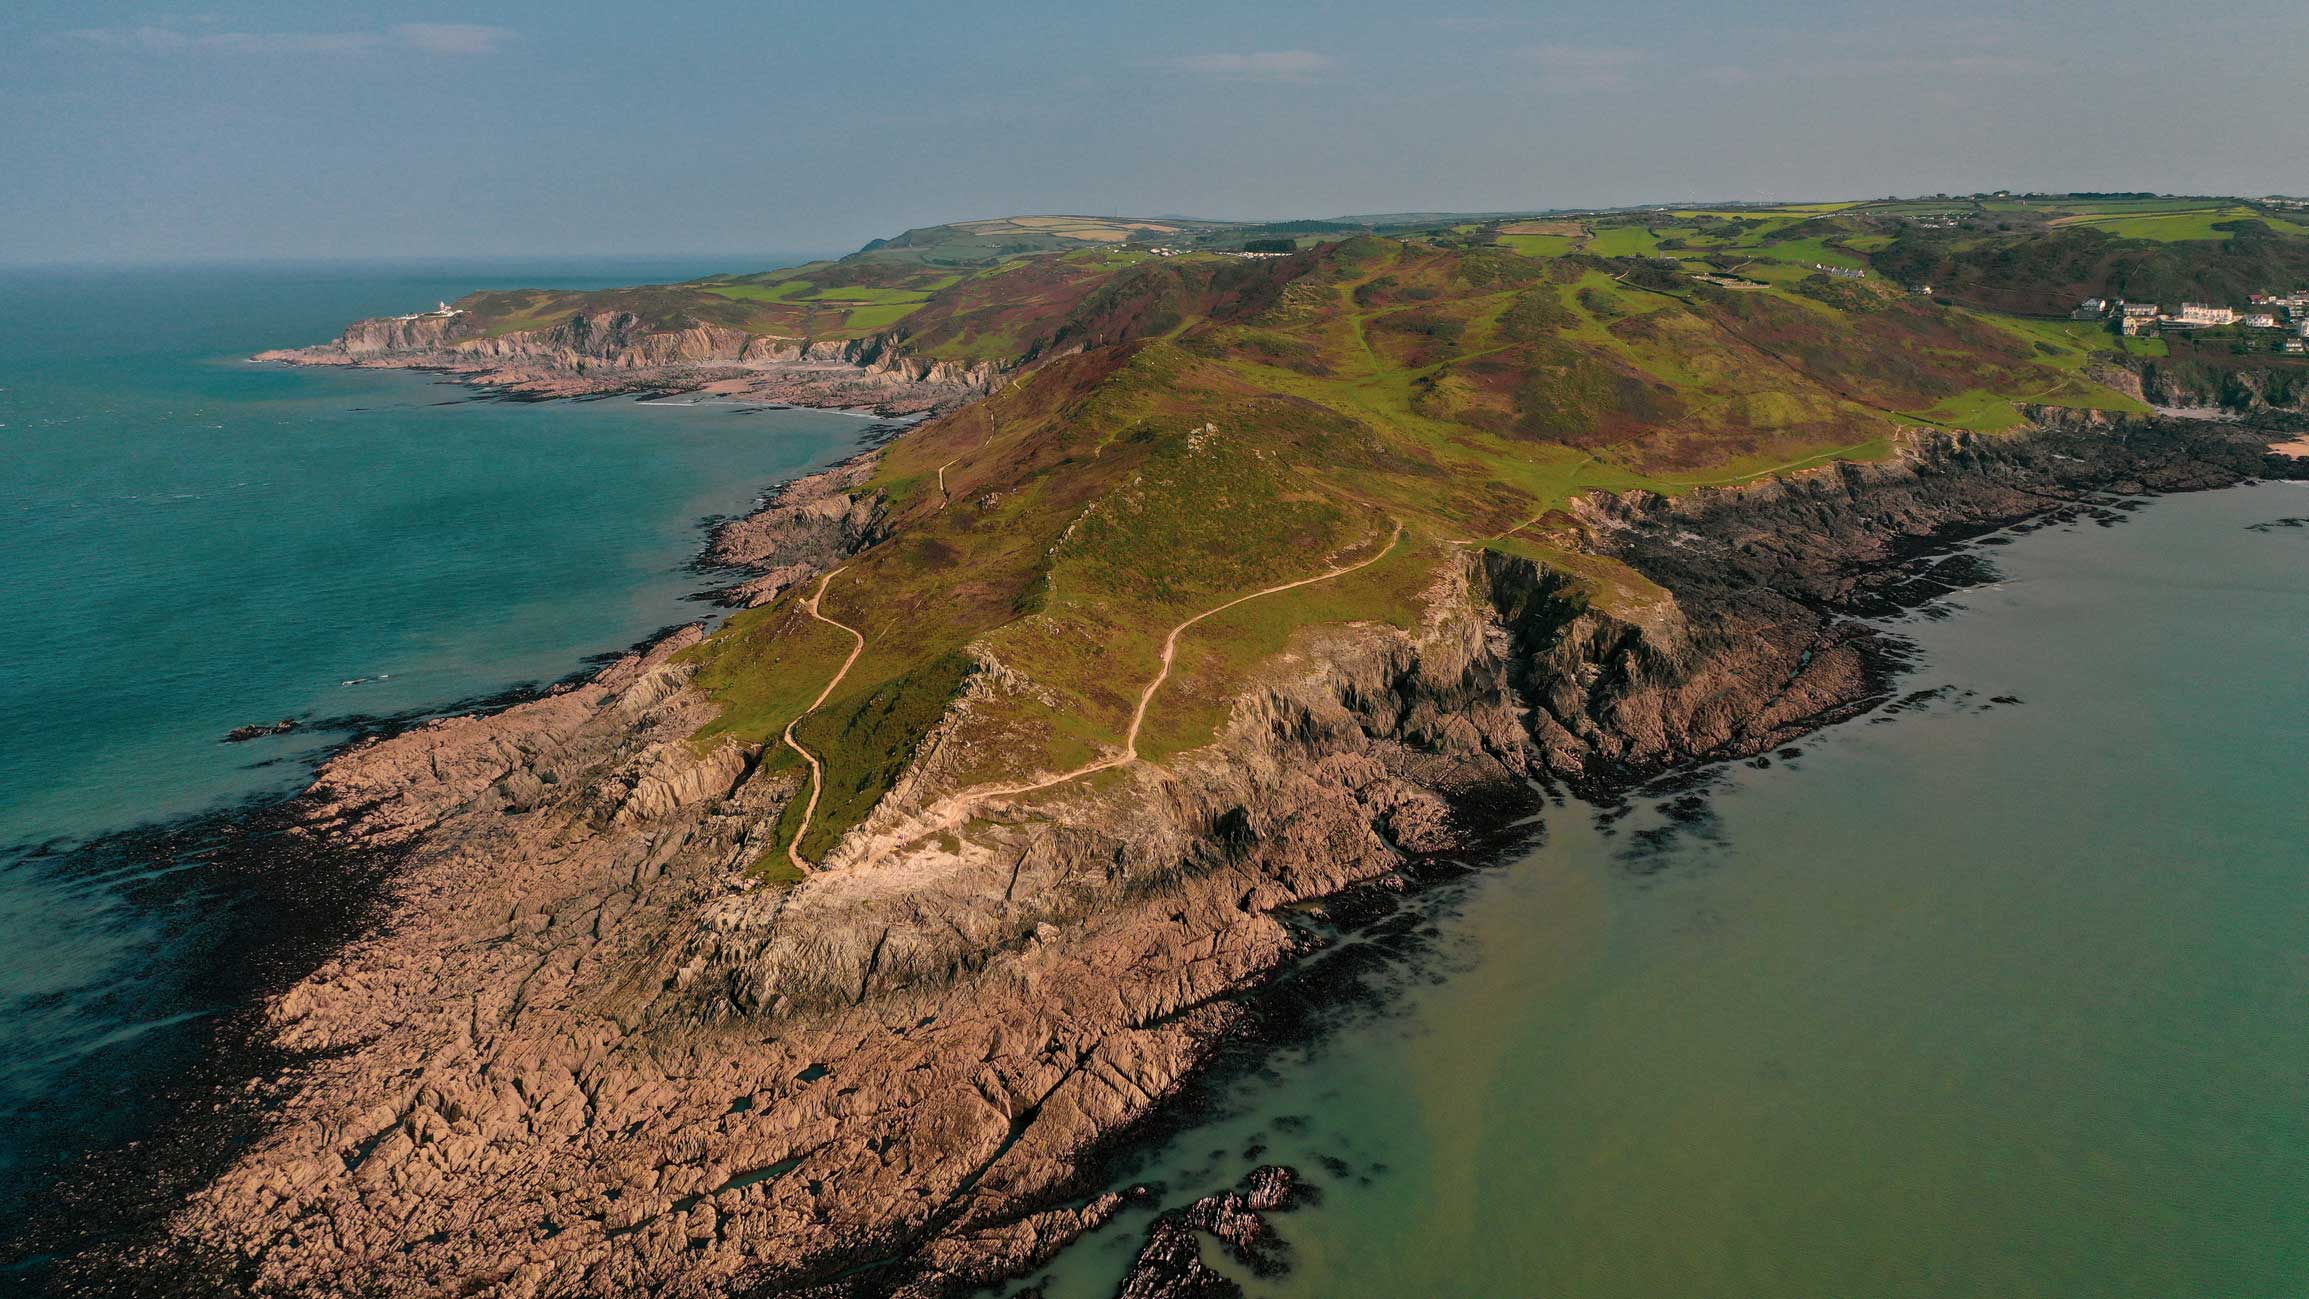 View of Morte Point, on the North Devon coast, with Bull Point Lighthouse in the background